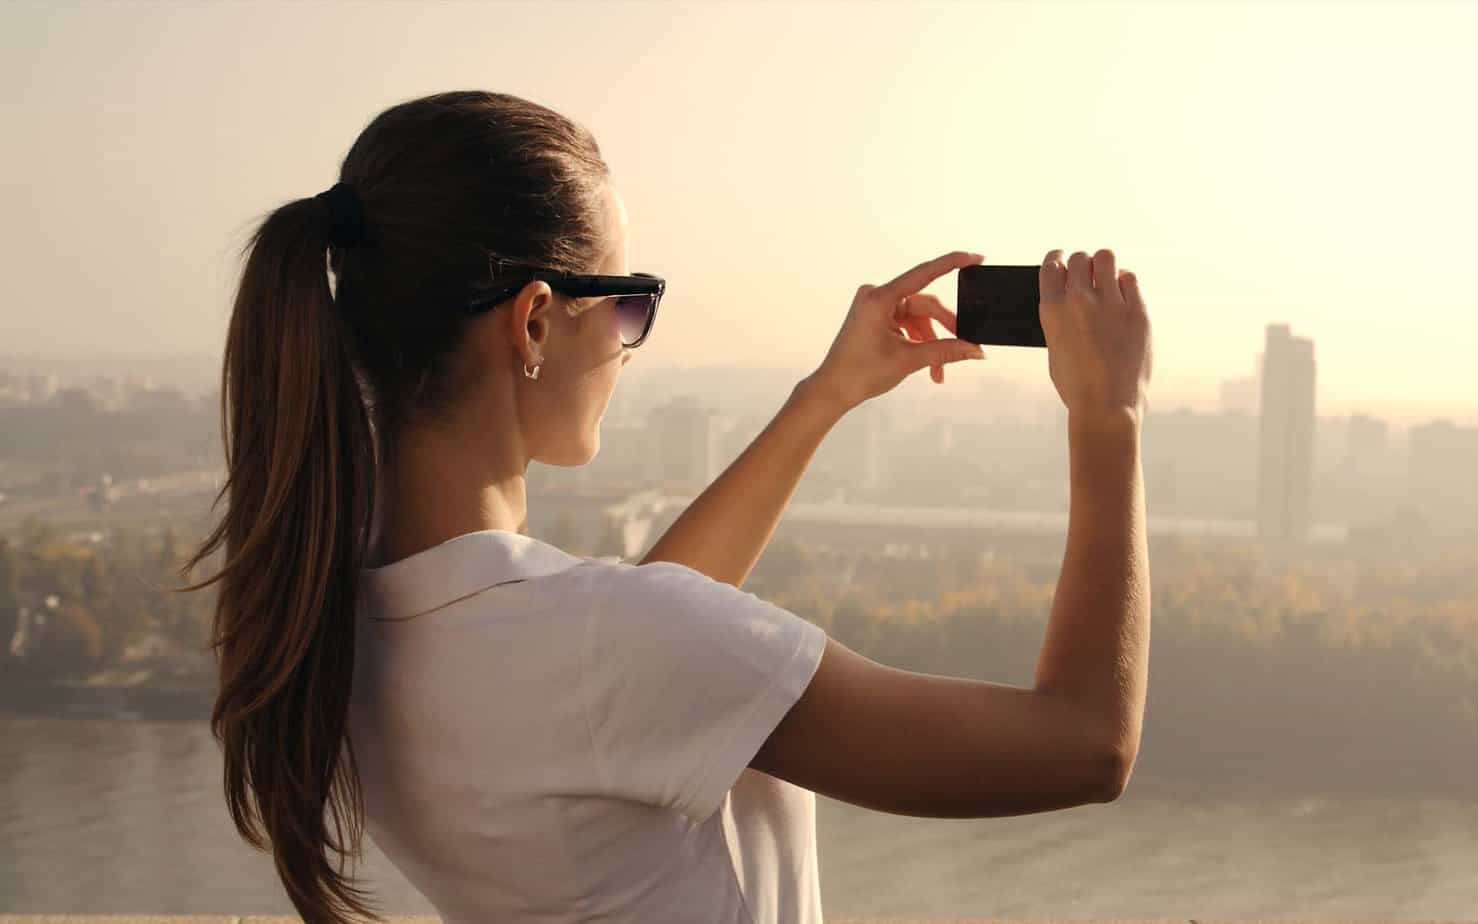 Learn How to Take Better Photos on Your Phone